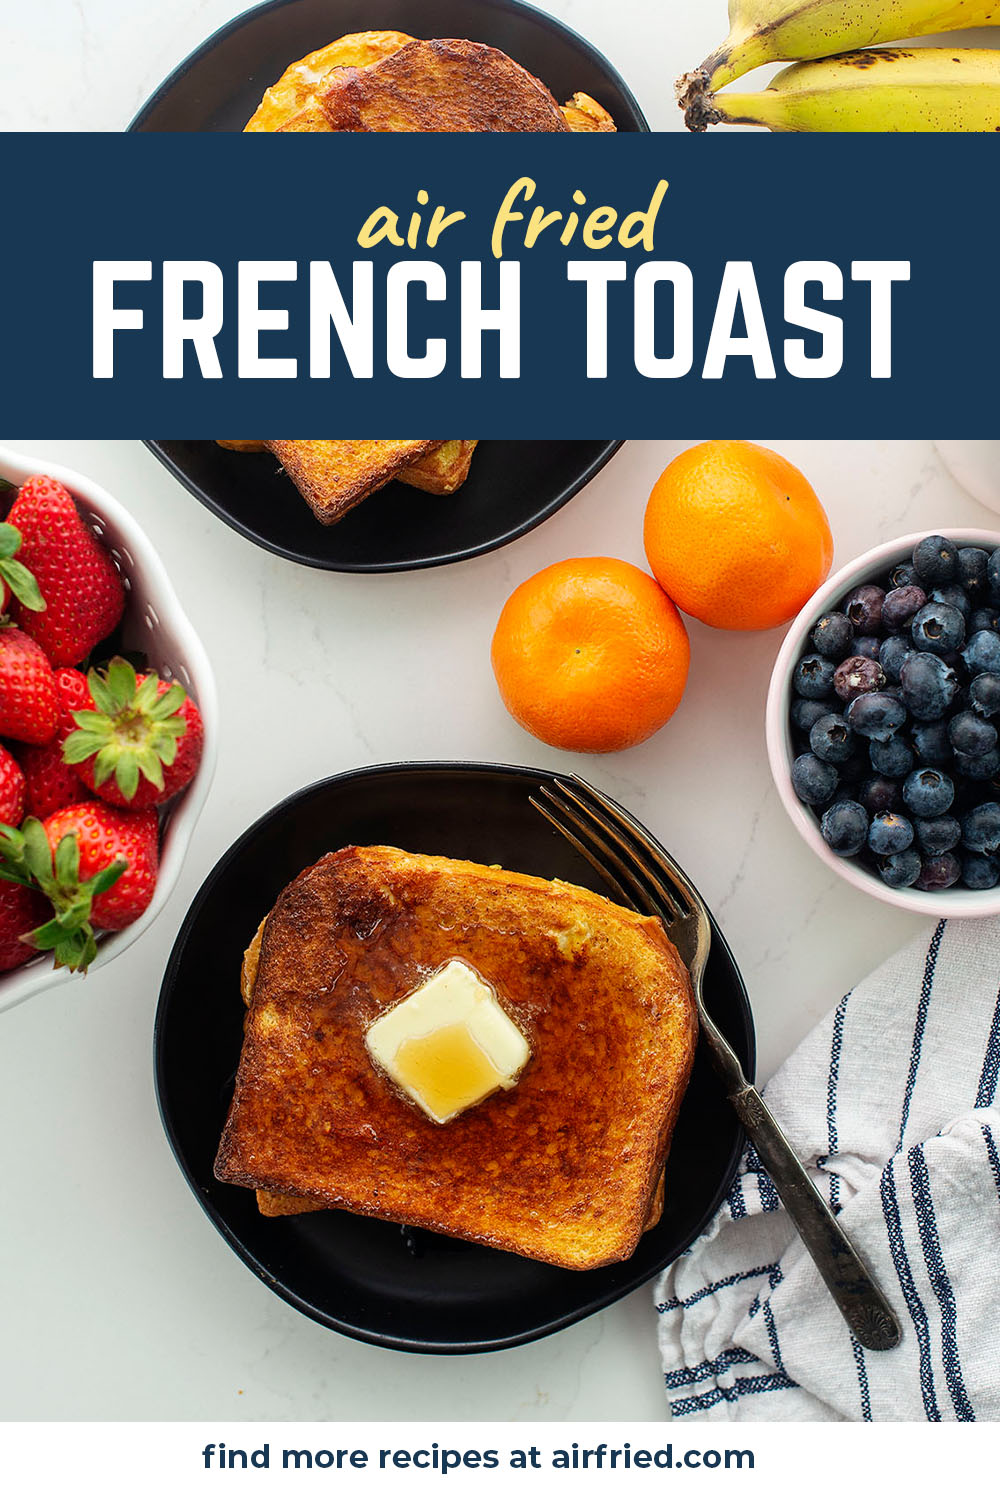 This recipe for air fryer French toast is wonderfully crisp and fluffy!